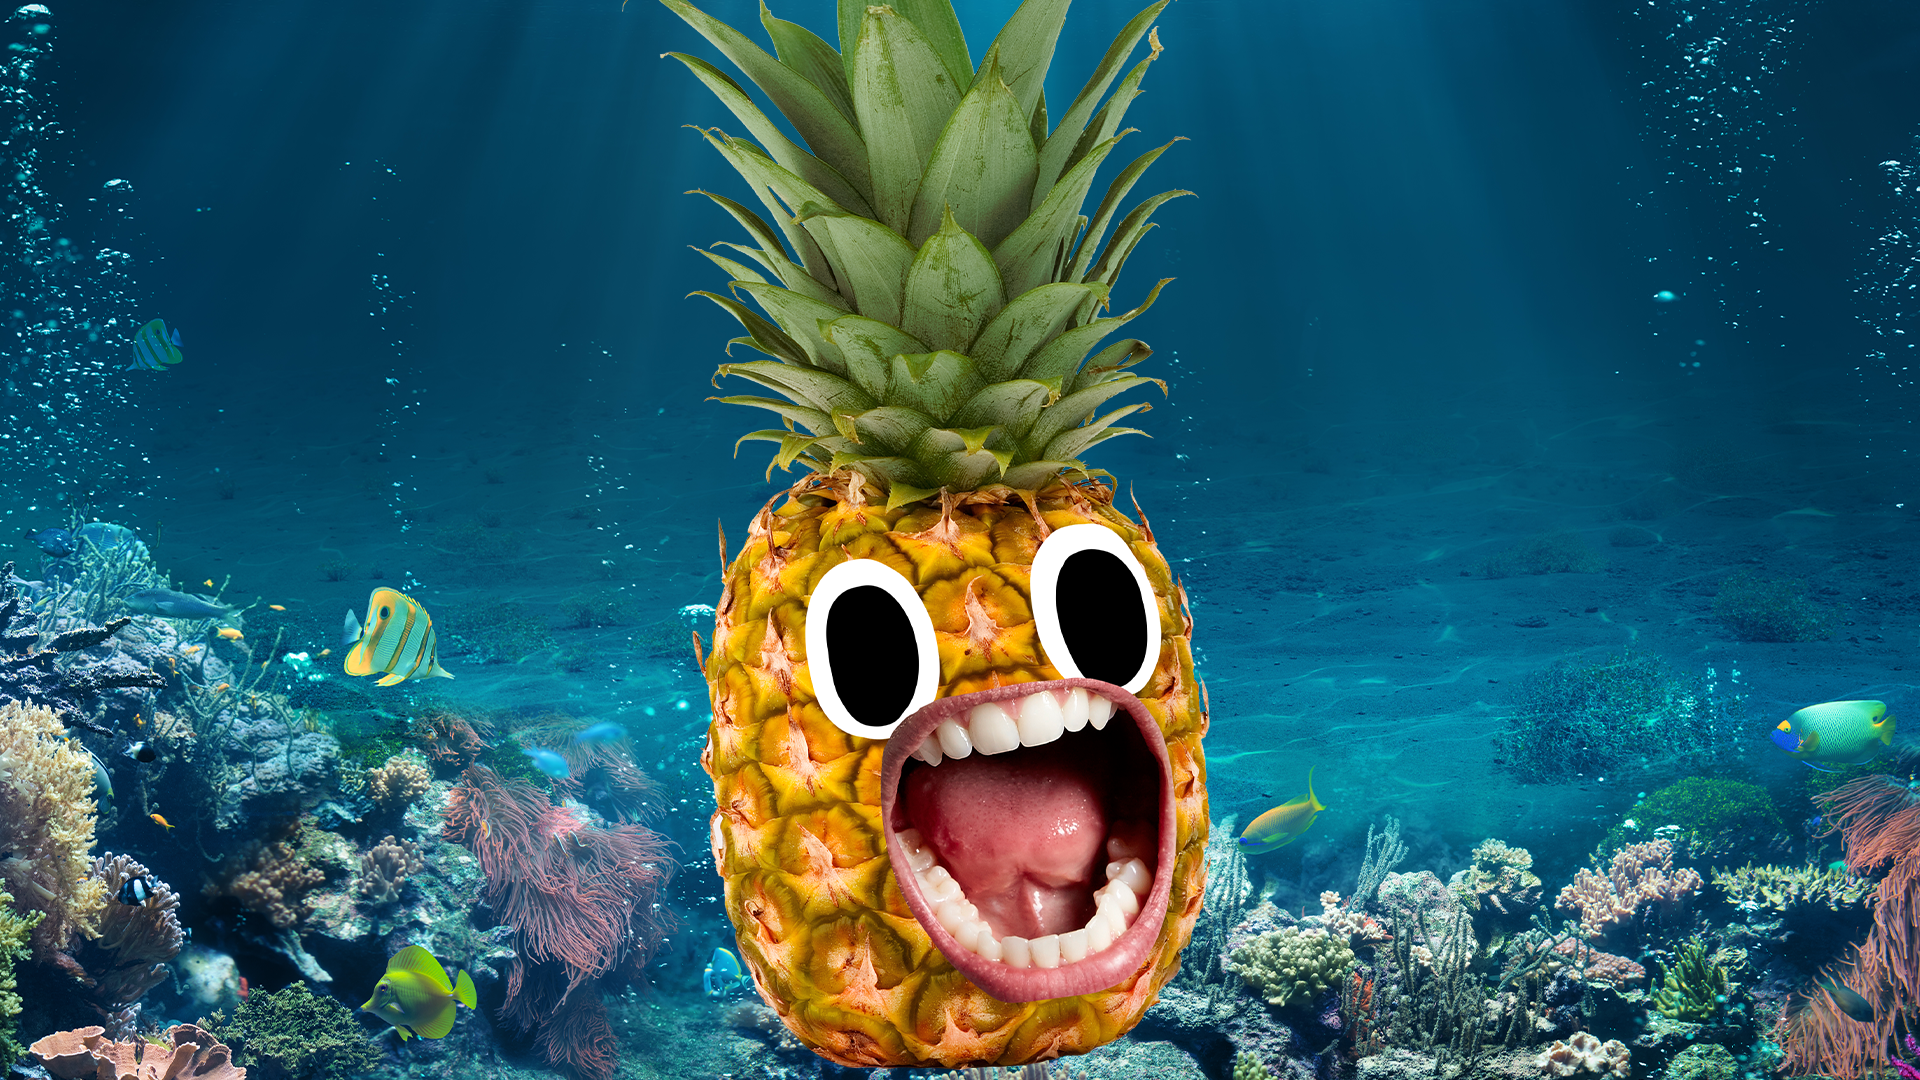 A pineapple under the sea